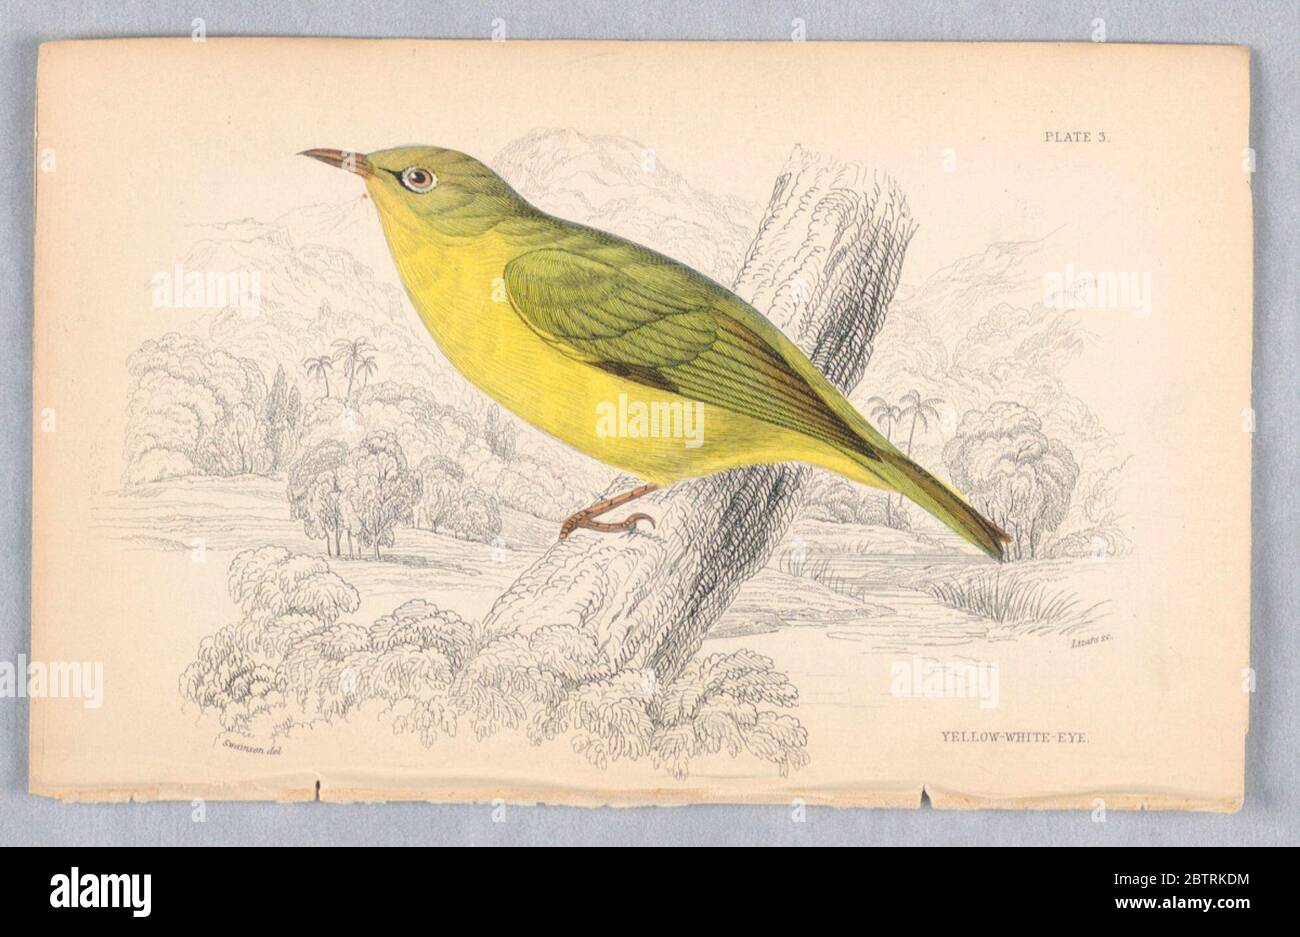 Yelllow WhiteEye Plate 3 from Birds of Western Africa. Research in ProgressBird with green back, wings, and tail and a yellow underside perched on a tree trunk. A river, meadows and mountains, beyond. Title and artists' names below. Stock Photo